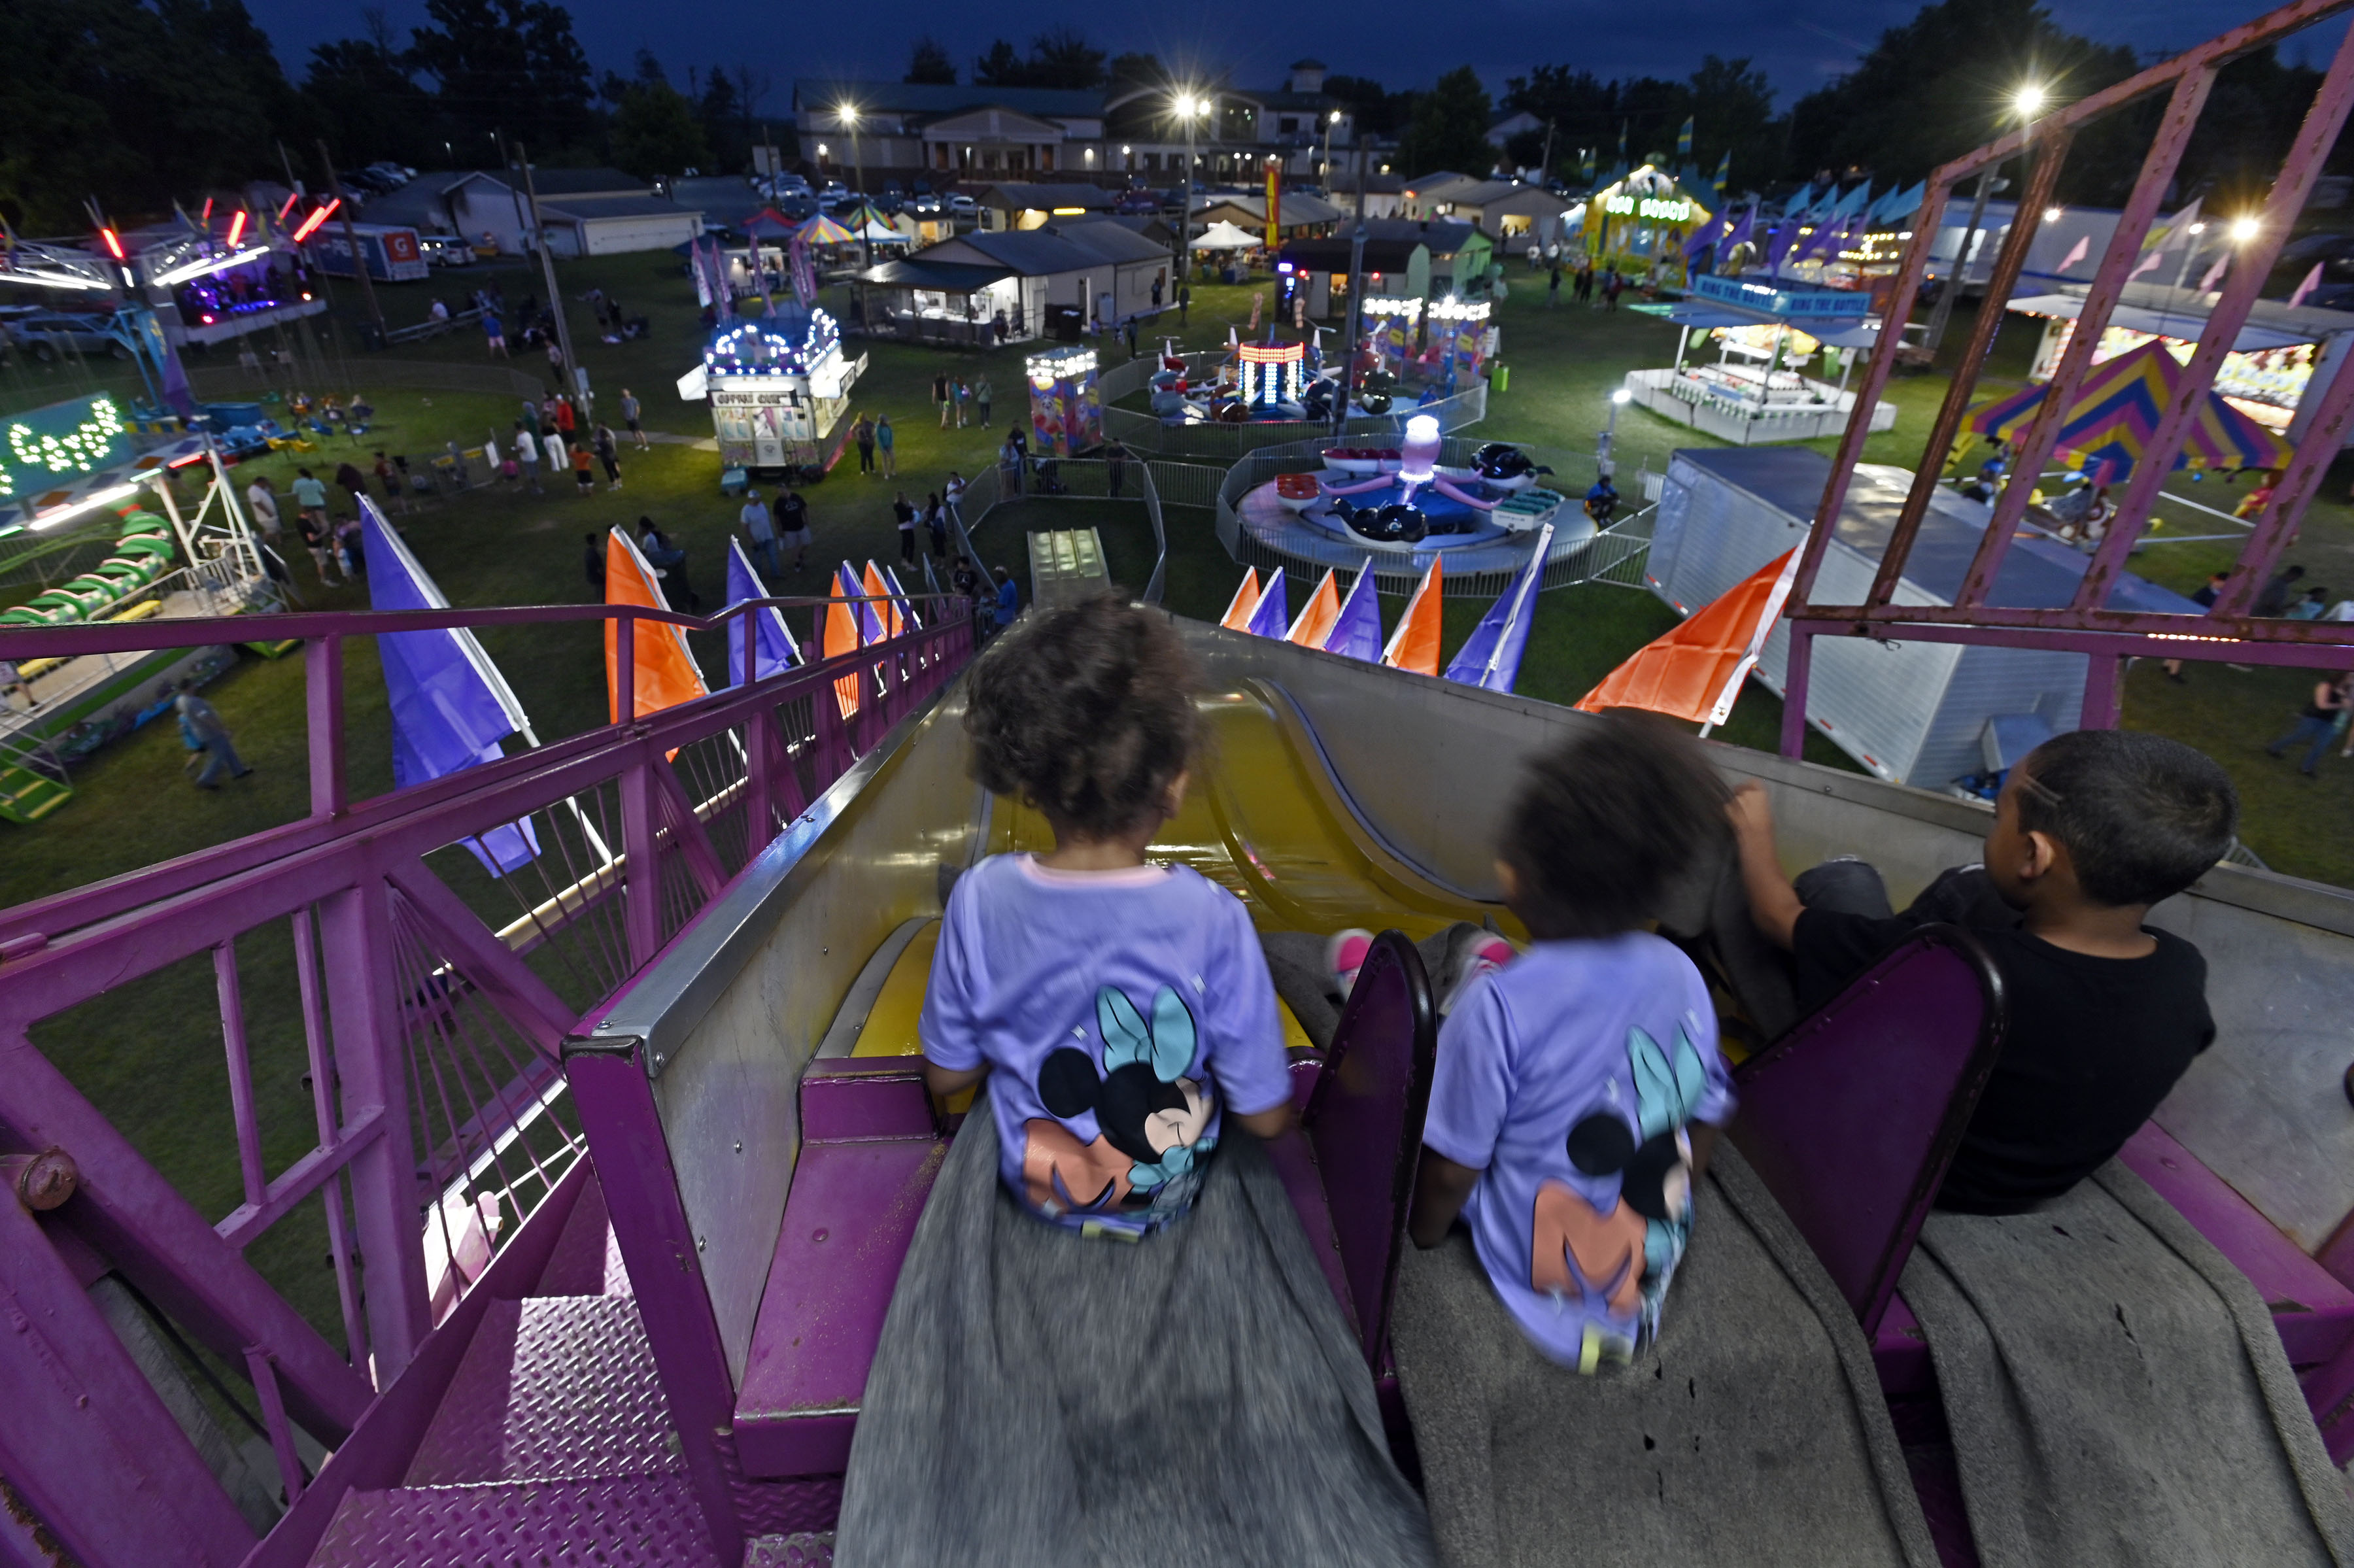 Children ride a giant slide at Sykesville Freedom District Fire Department's Annual firemen's carnival which runs from June 8-15. (Kenneth K. Lam/Staff)